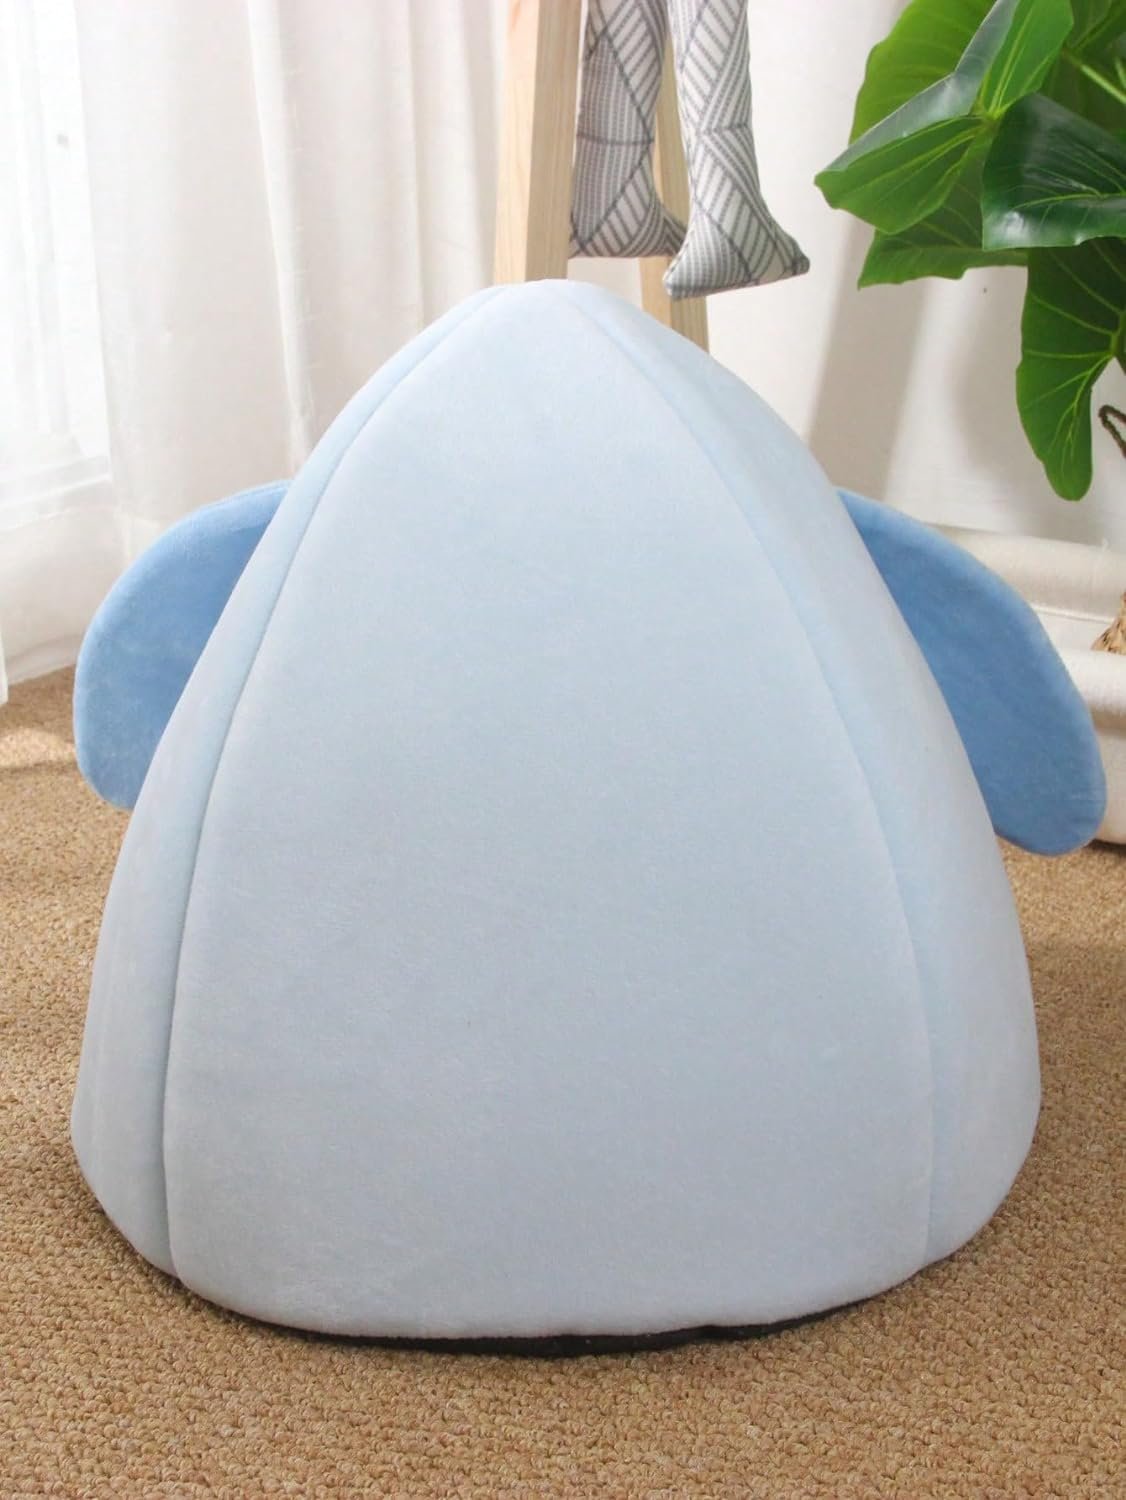 QWINEE Indoor Cat Bed Cave with Removable Cushion Pet Plush Warm Tent Cartoon Penguin Design Pet Sleeping Bed for Cats Dogs Kitten Puppy and Rabbit Blue M